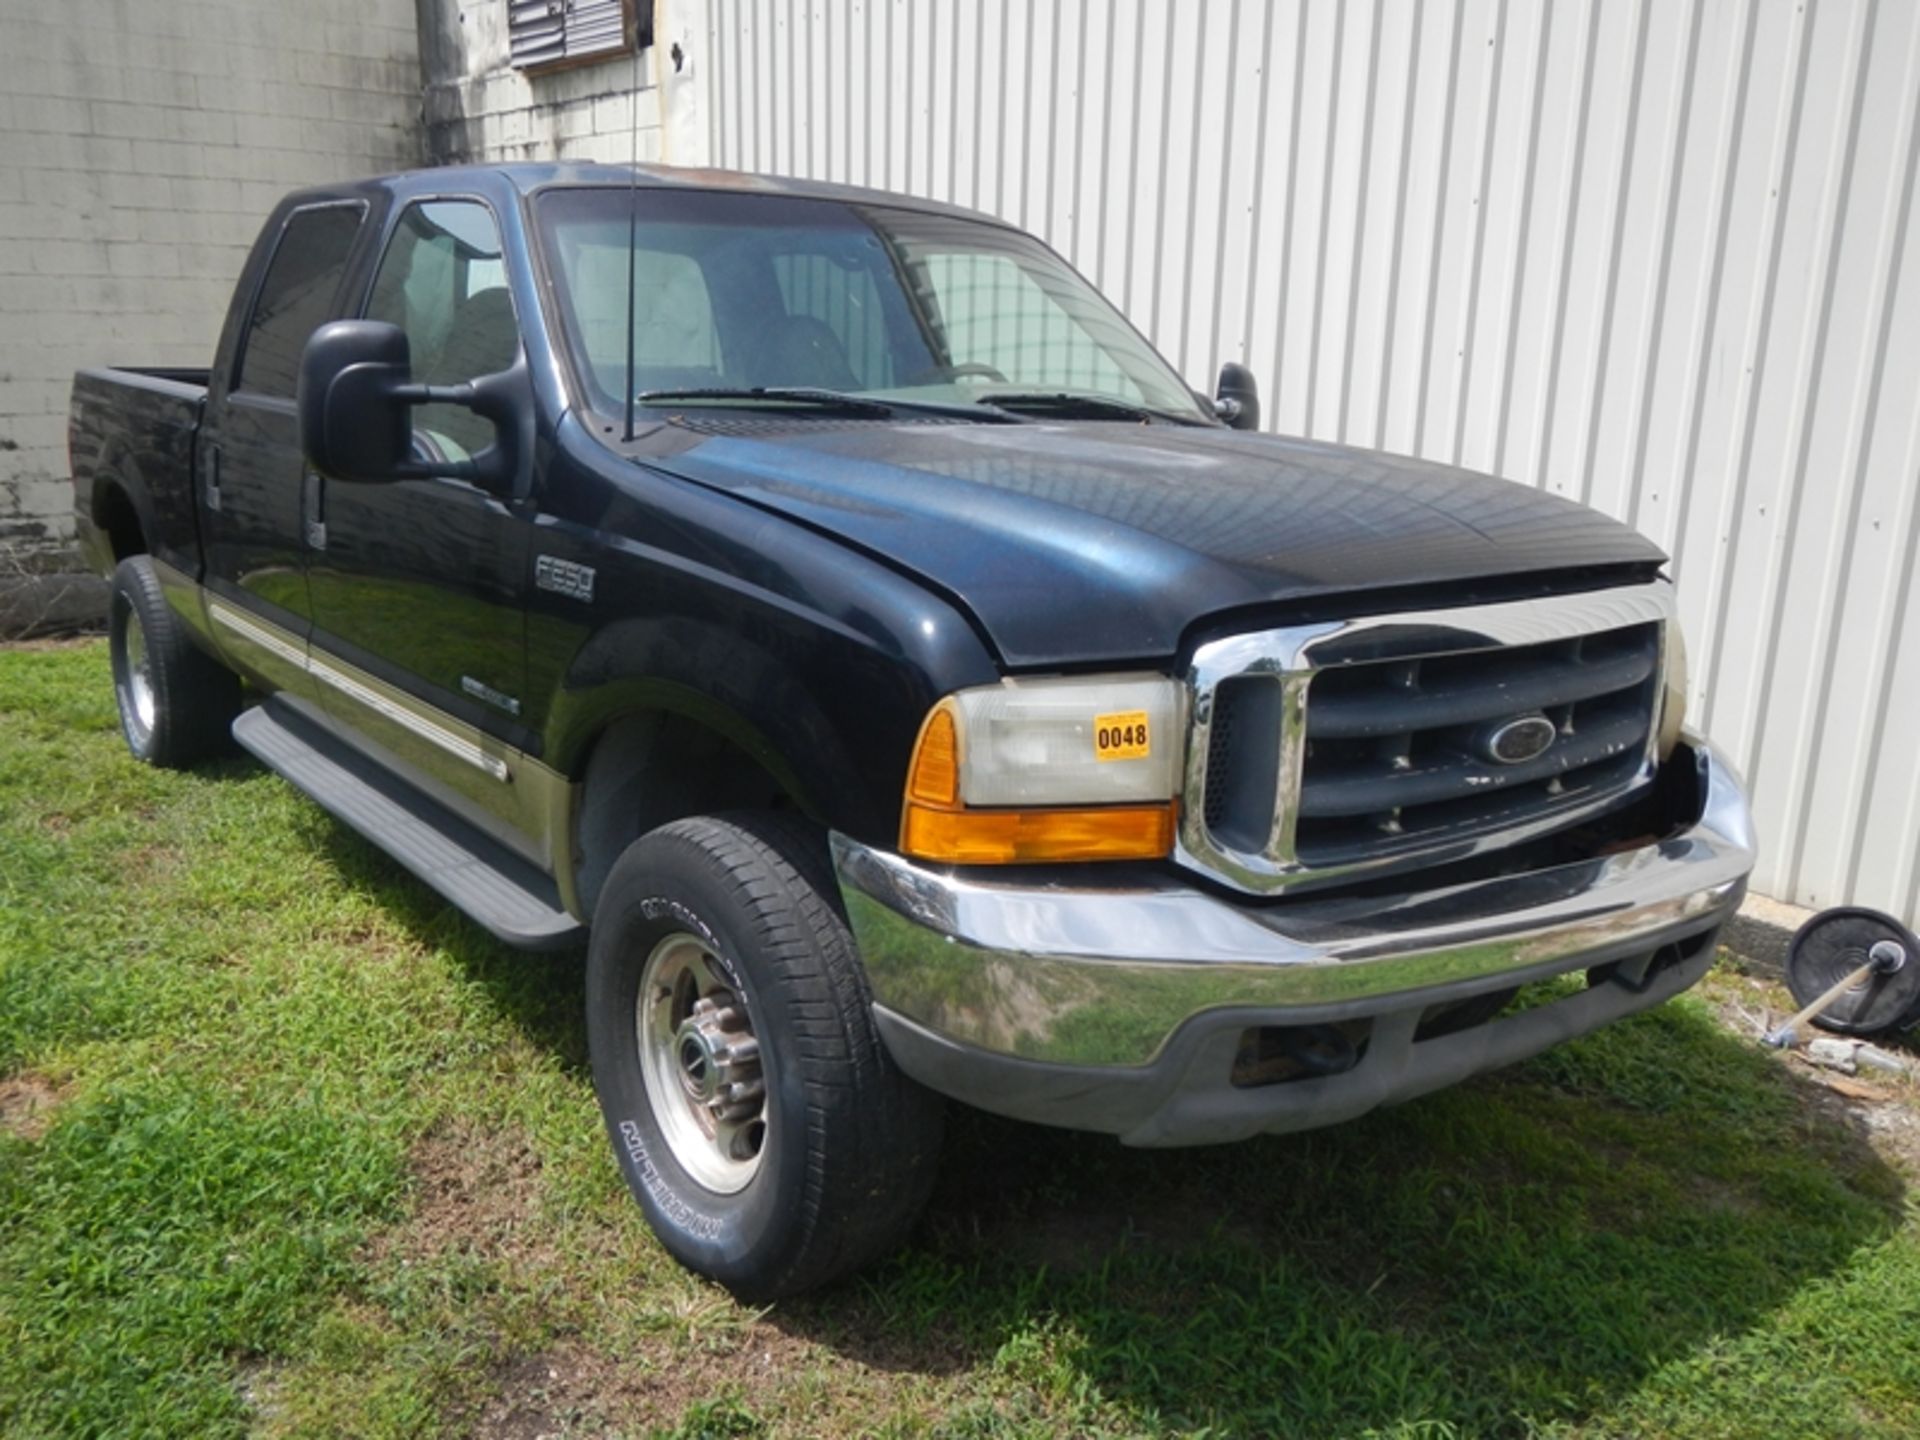 2000 FORD F250 4WD, crew cab, 7.3 diesel, 217,651 miles - 1FTNW21F1YED31218 - Image 2 of 6